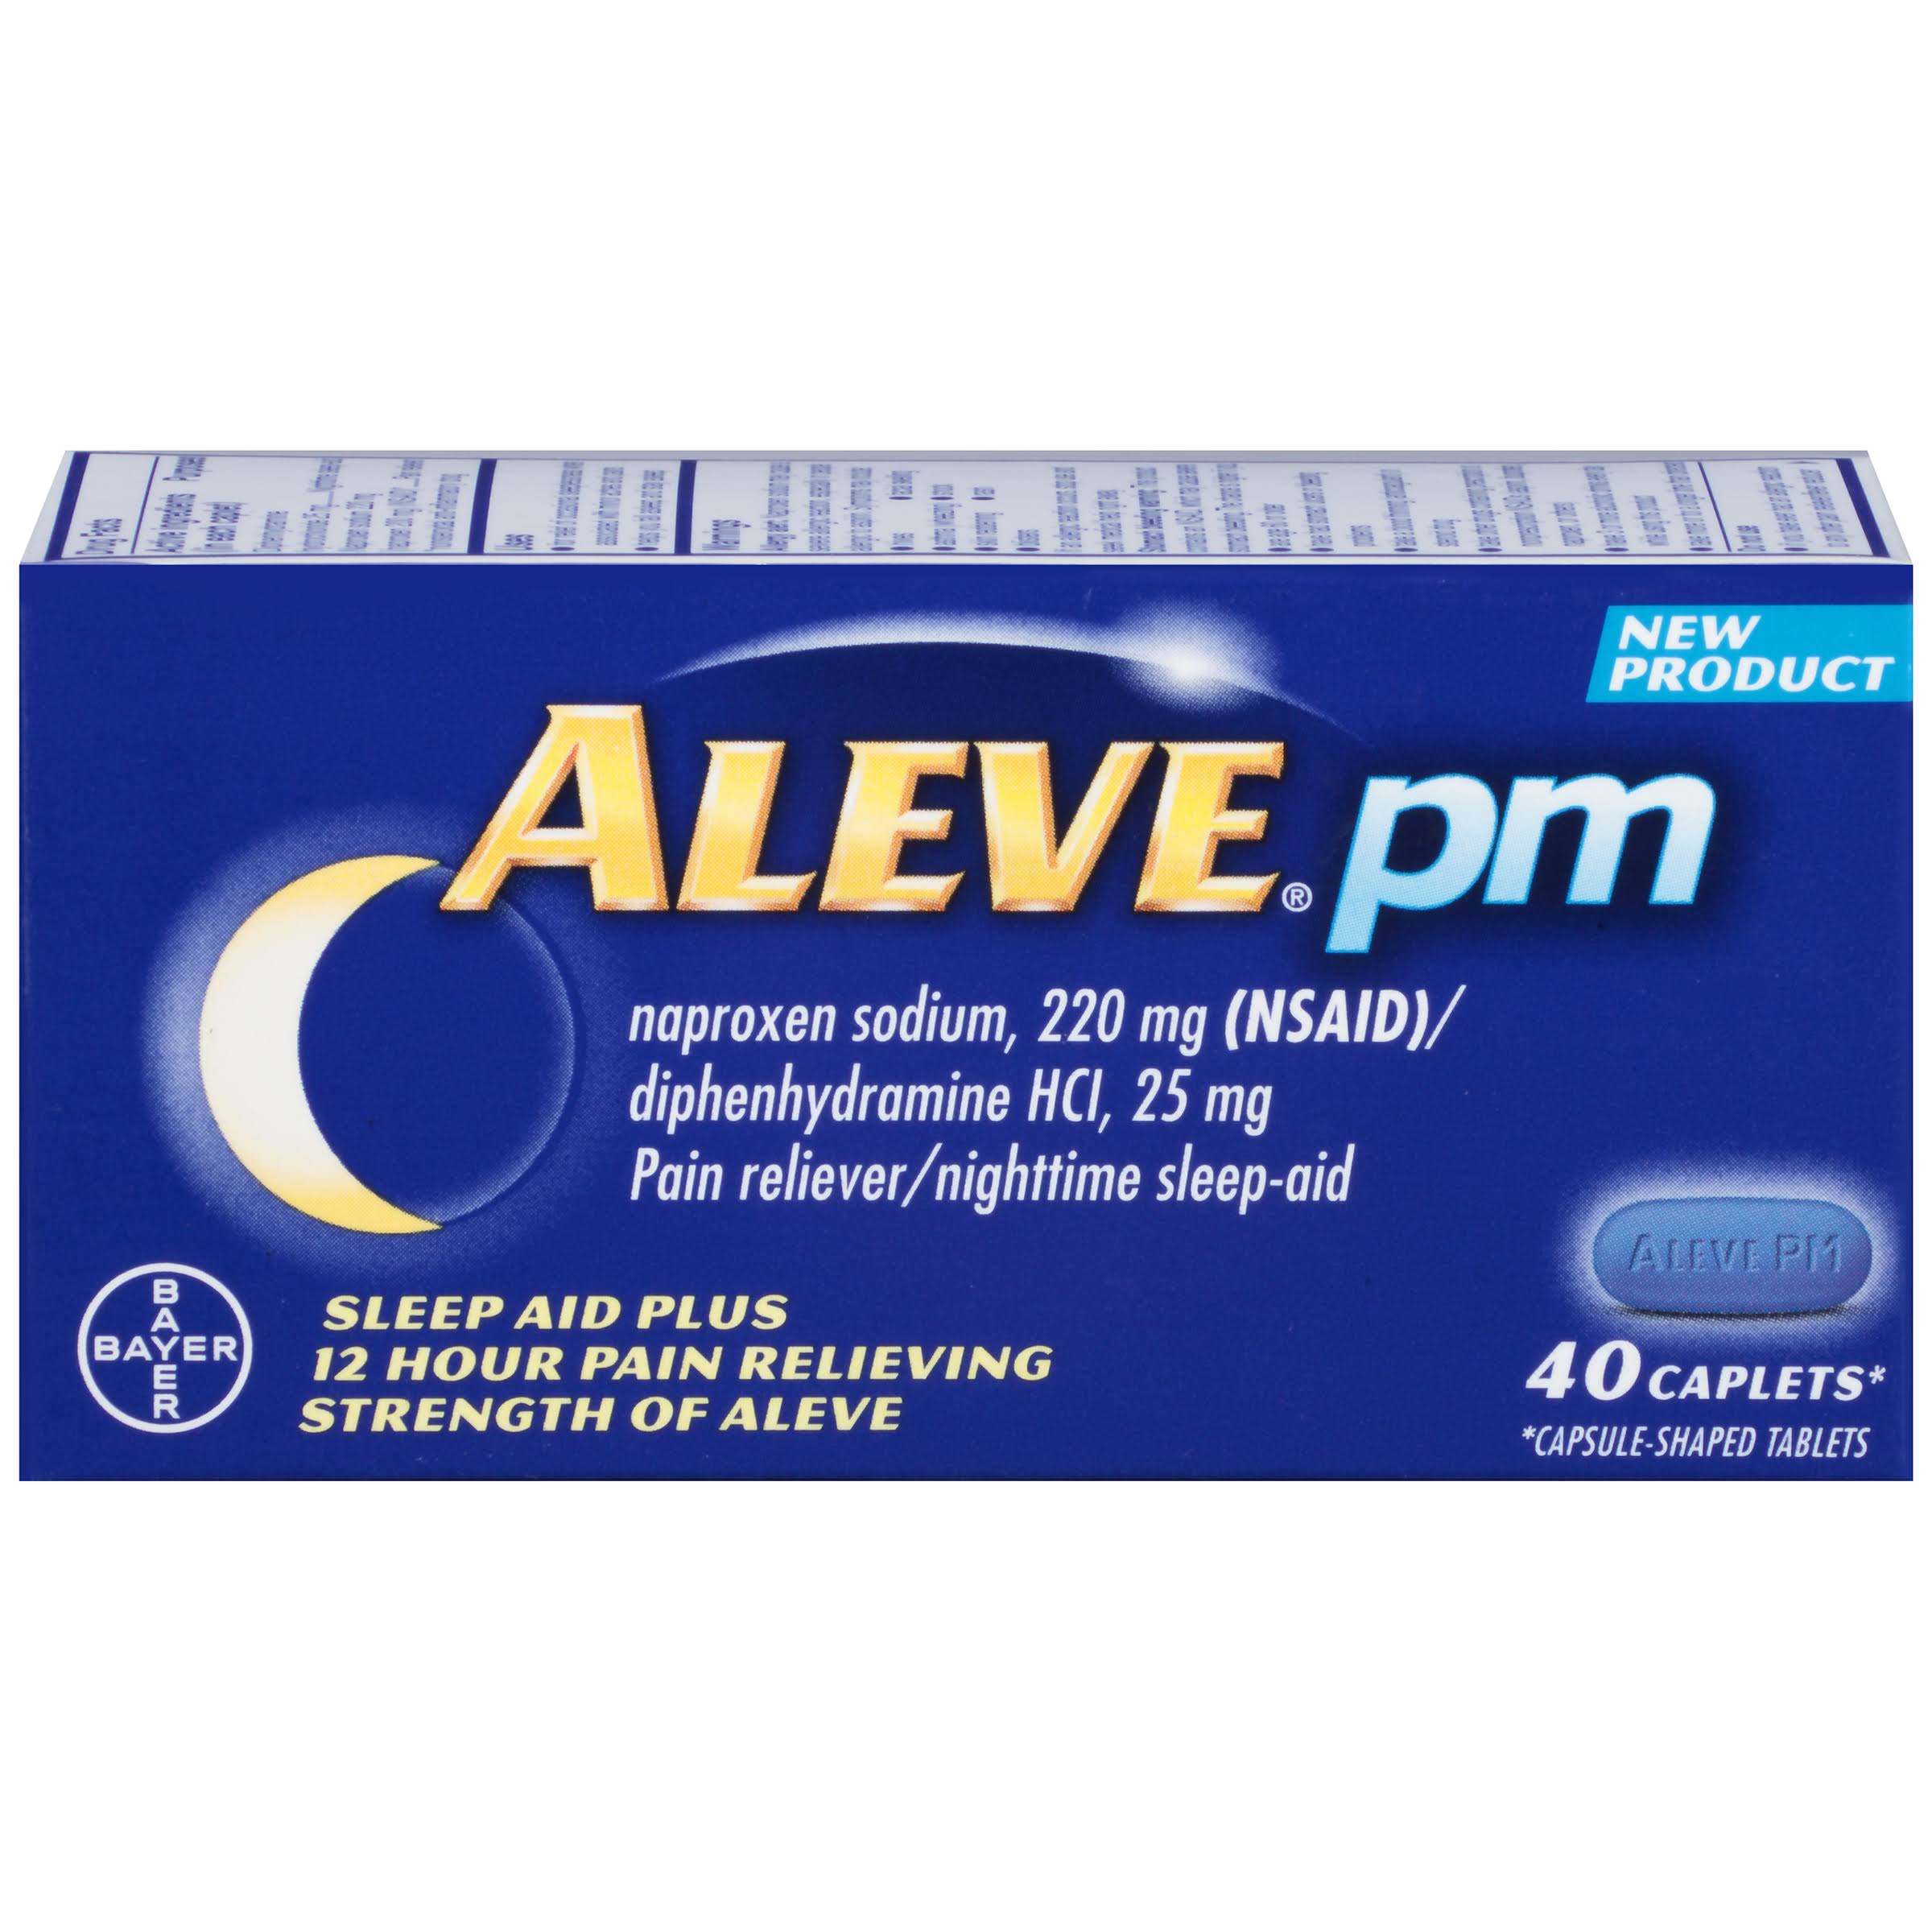 Aleve PM Pain Reliever/Nighttime Sleep Aid Caplets